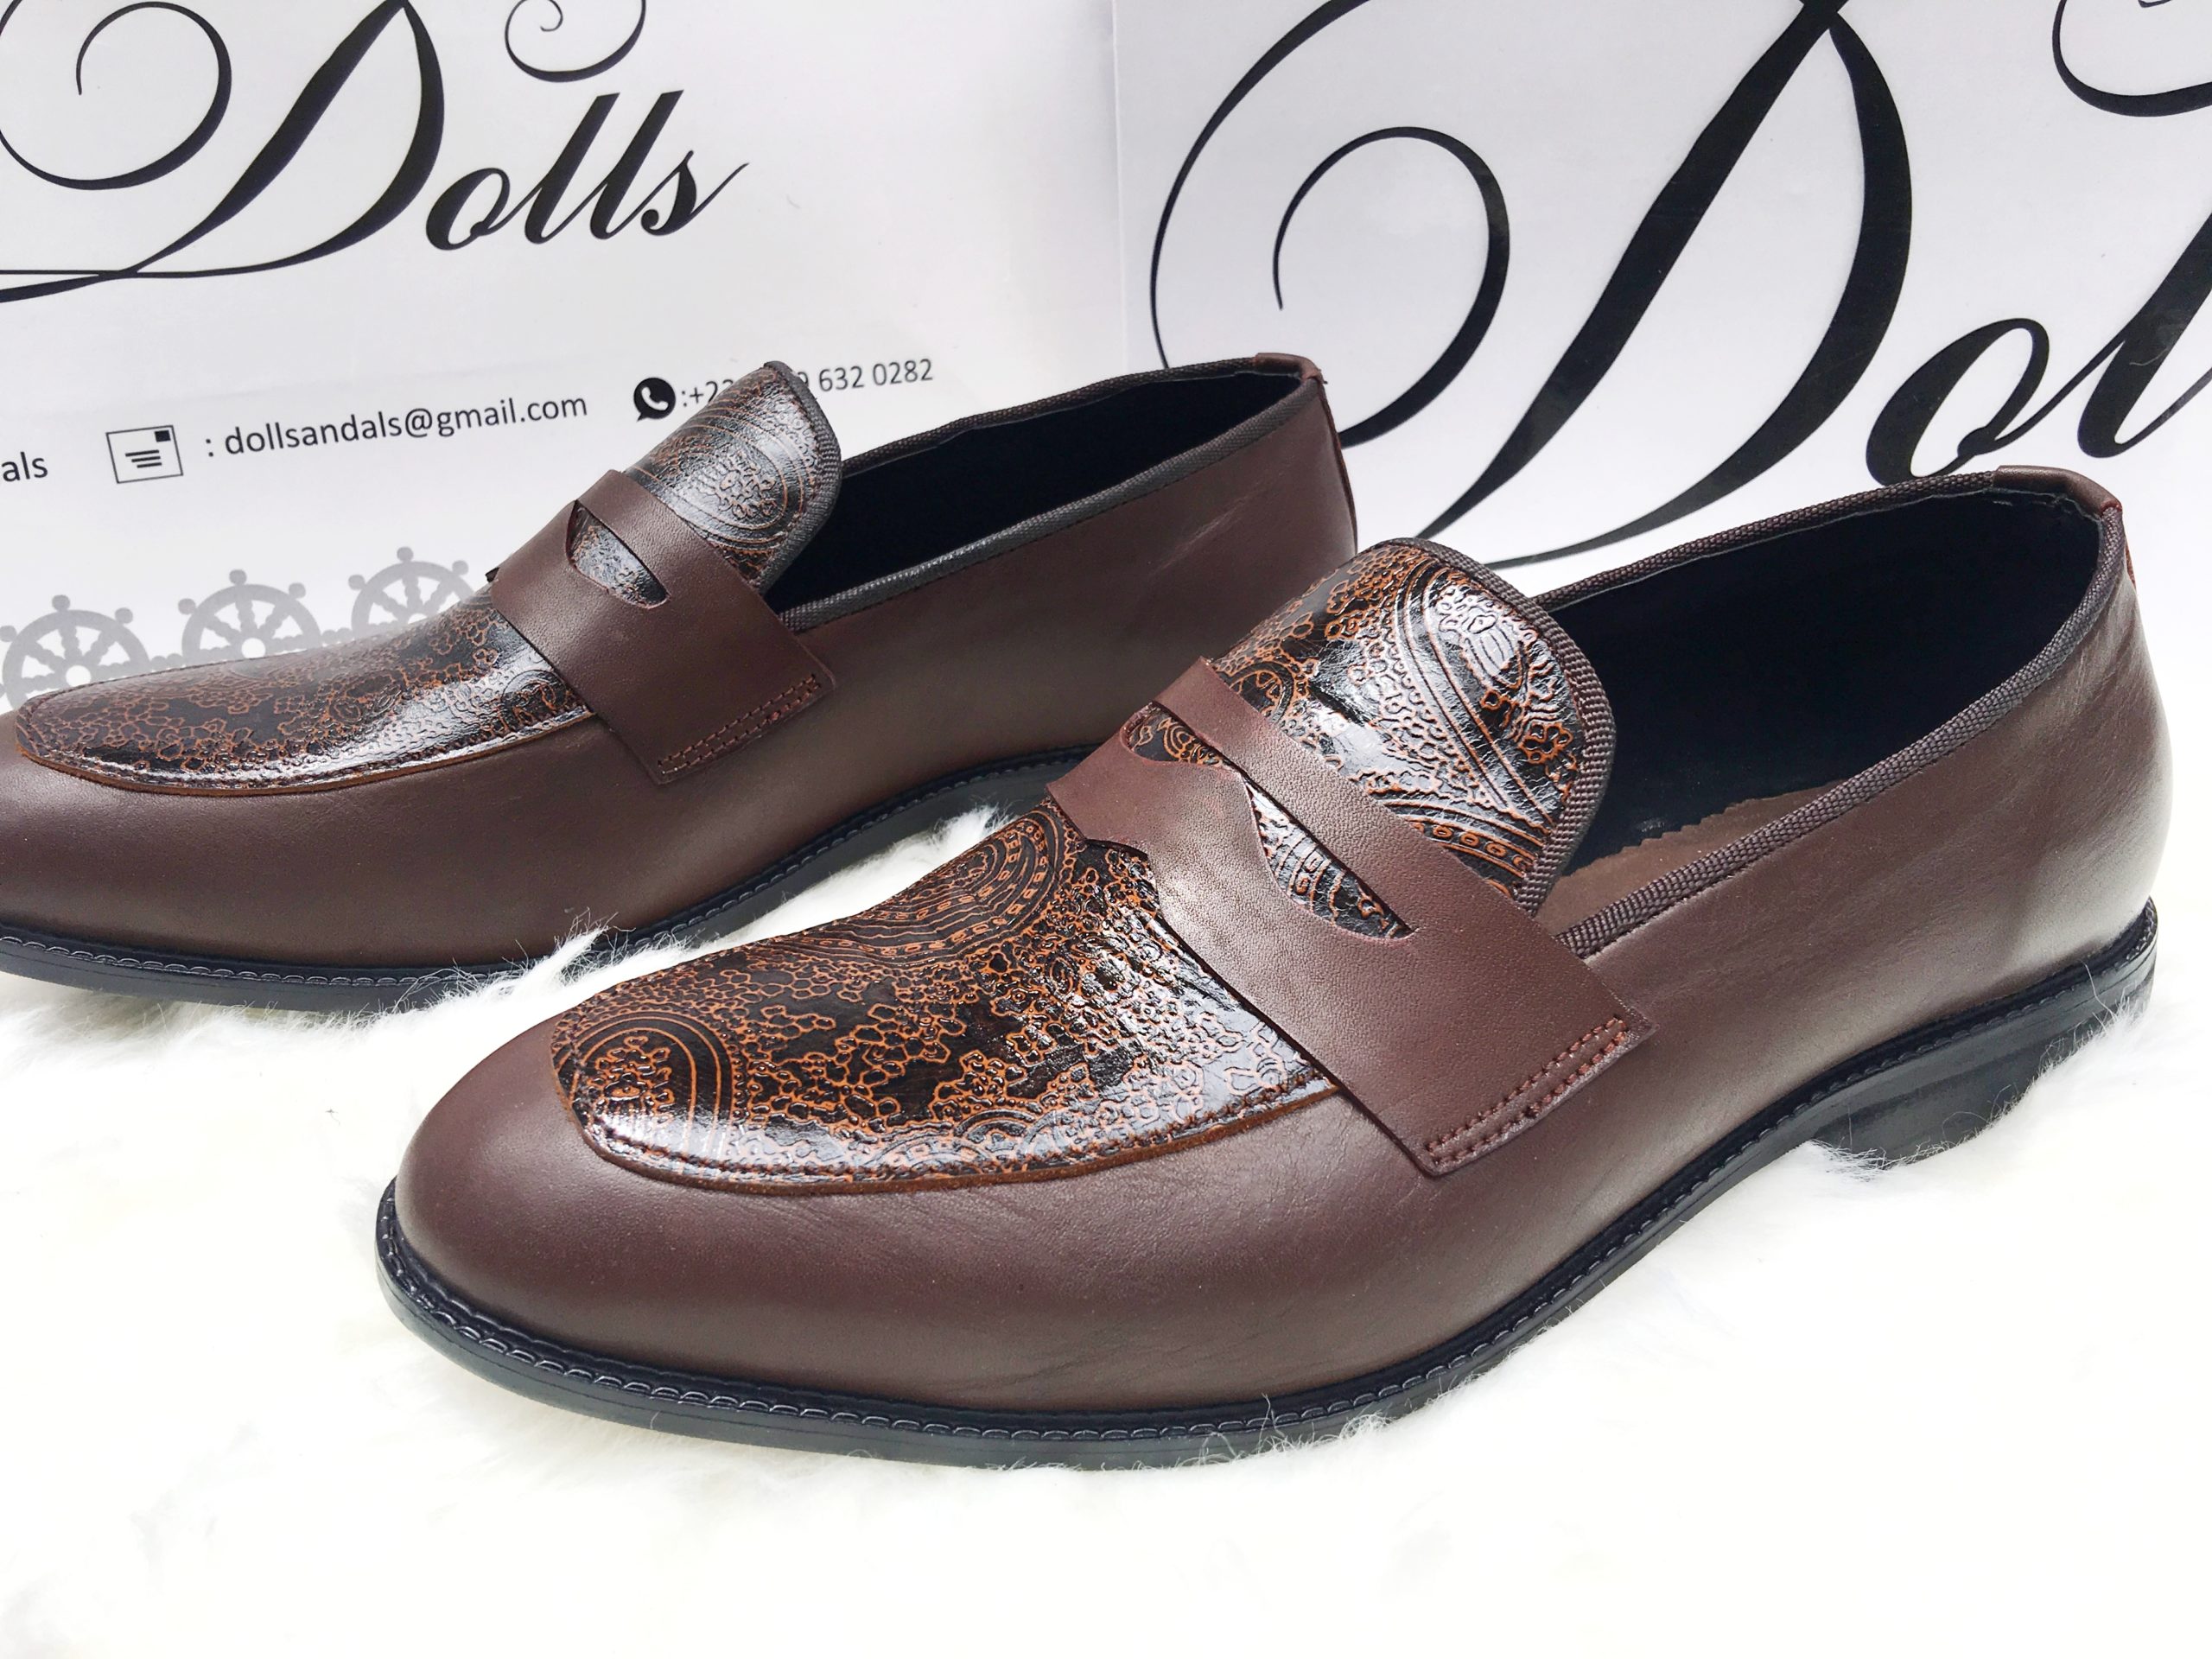 picture of an embossed loafers for men by Dolls leather products